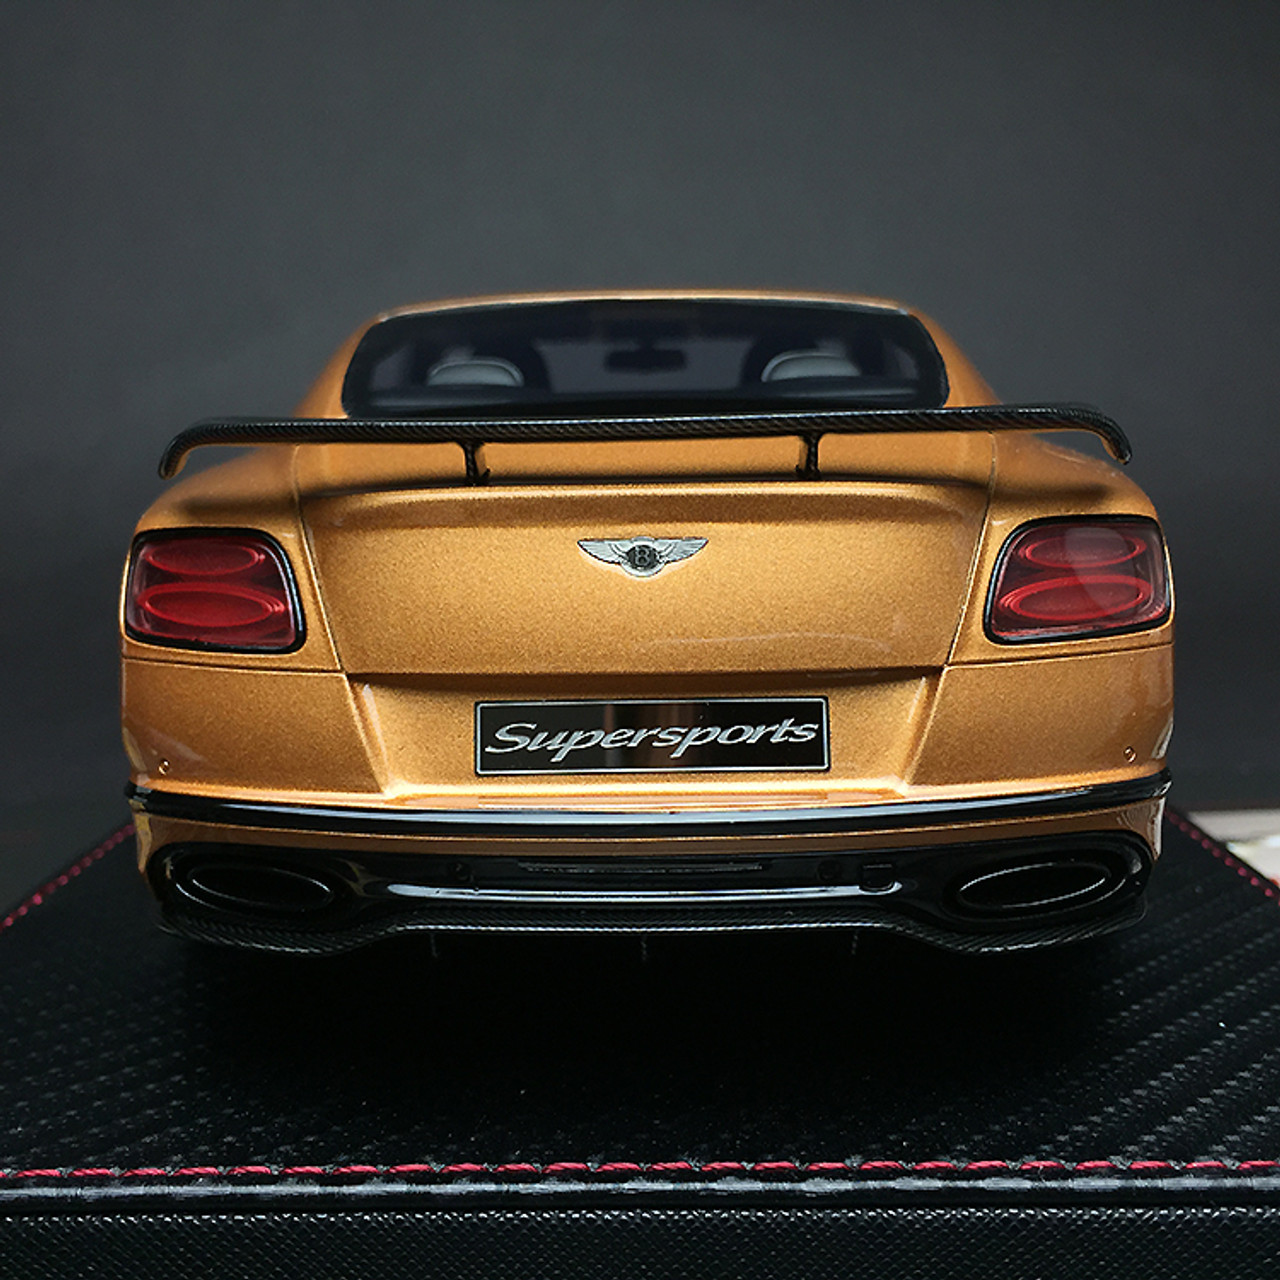 1/18 Frontiart FA Bentley Continental Supersports (Gold Champagne) Car Model Limited #3/498